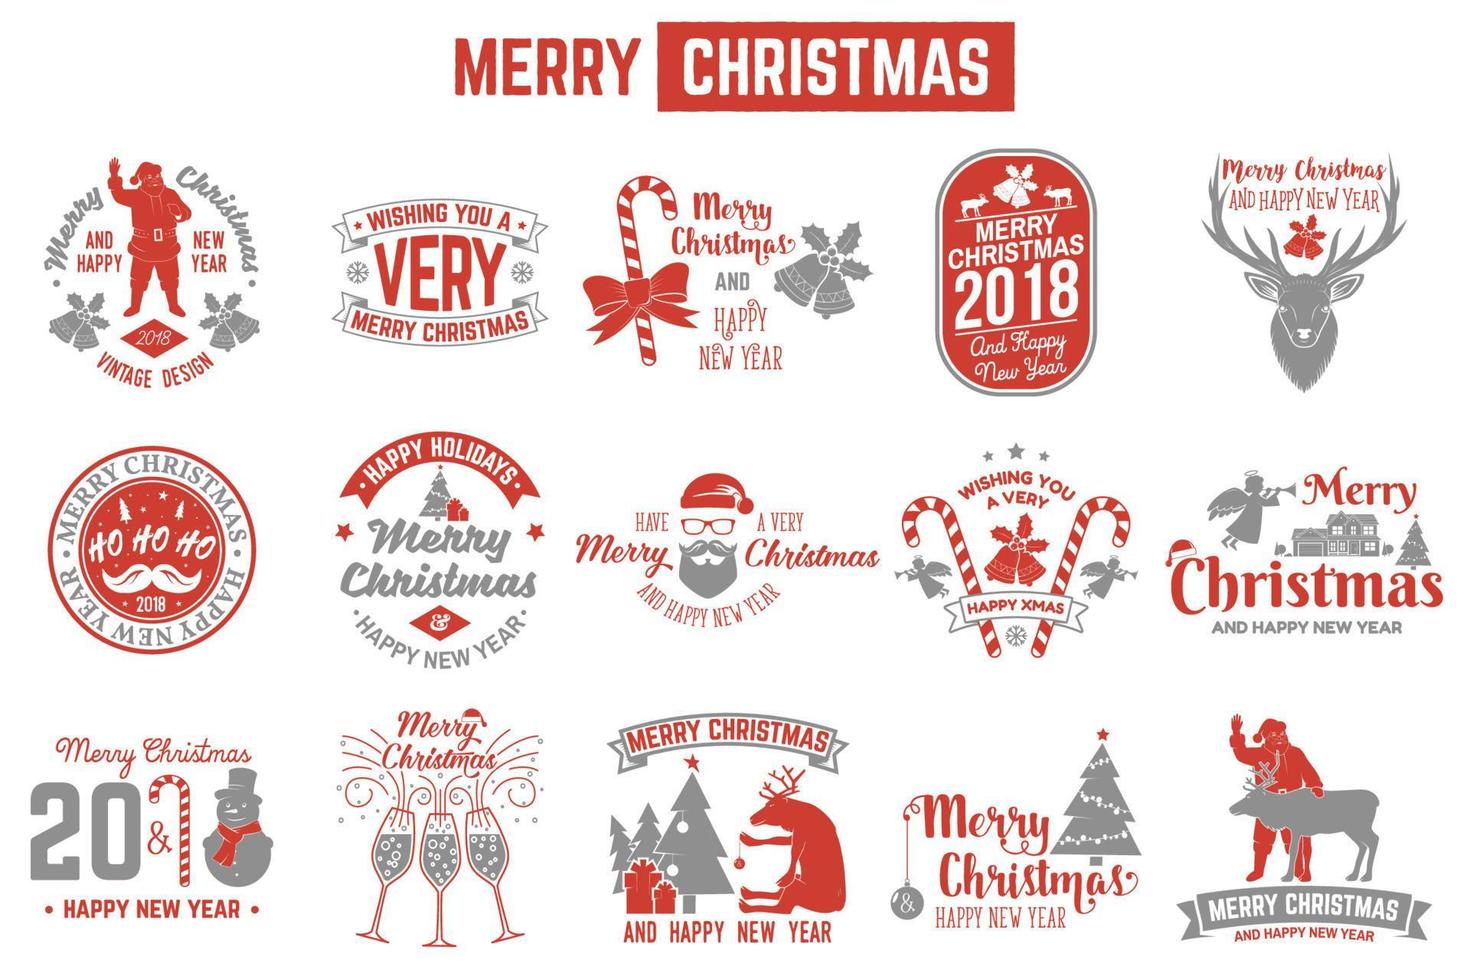 Merry Christmas and Happy New Year 2018 retro template with Santa Claus vector